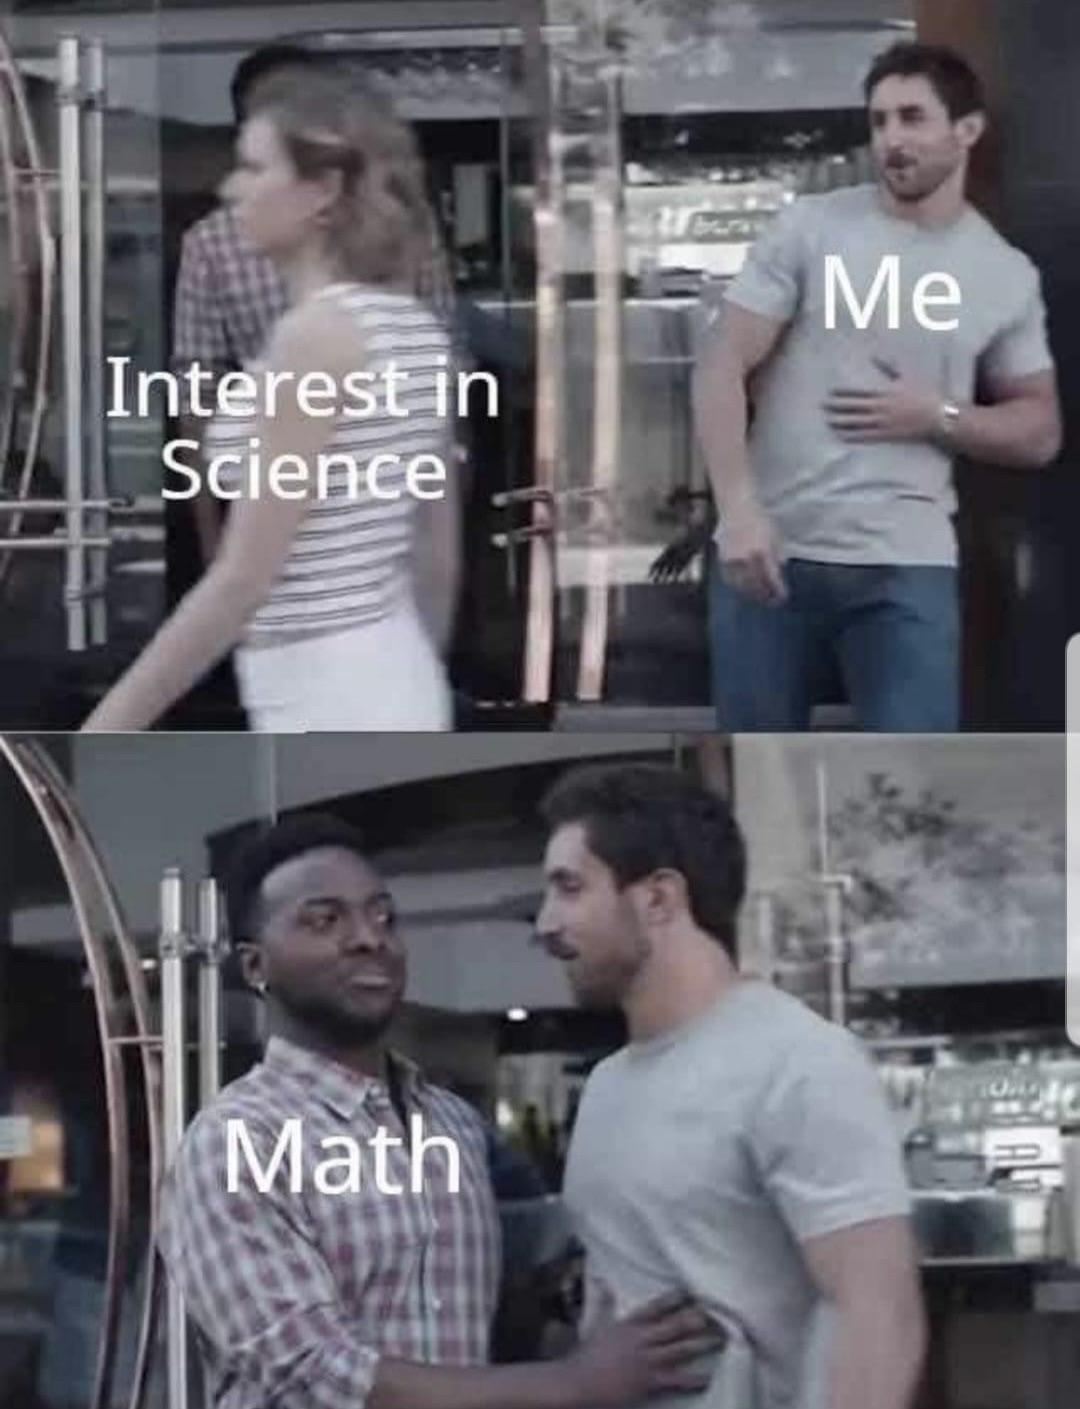 funny memes - bro not cool meme template - Me Interest in Science Math